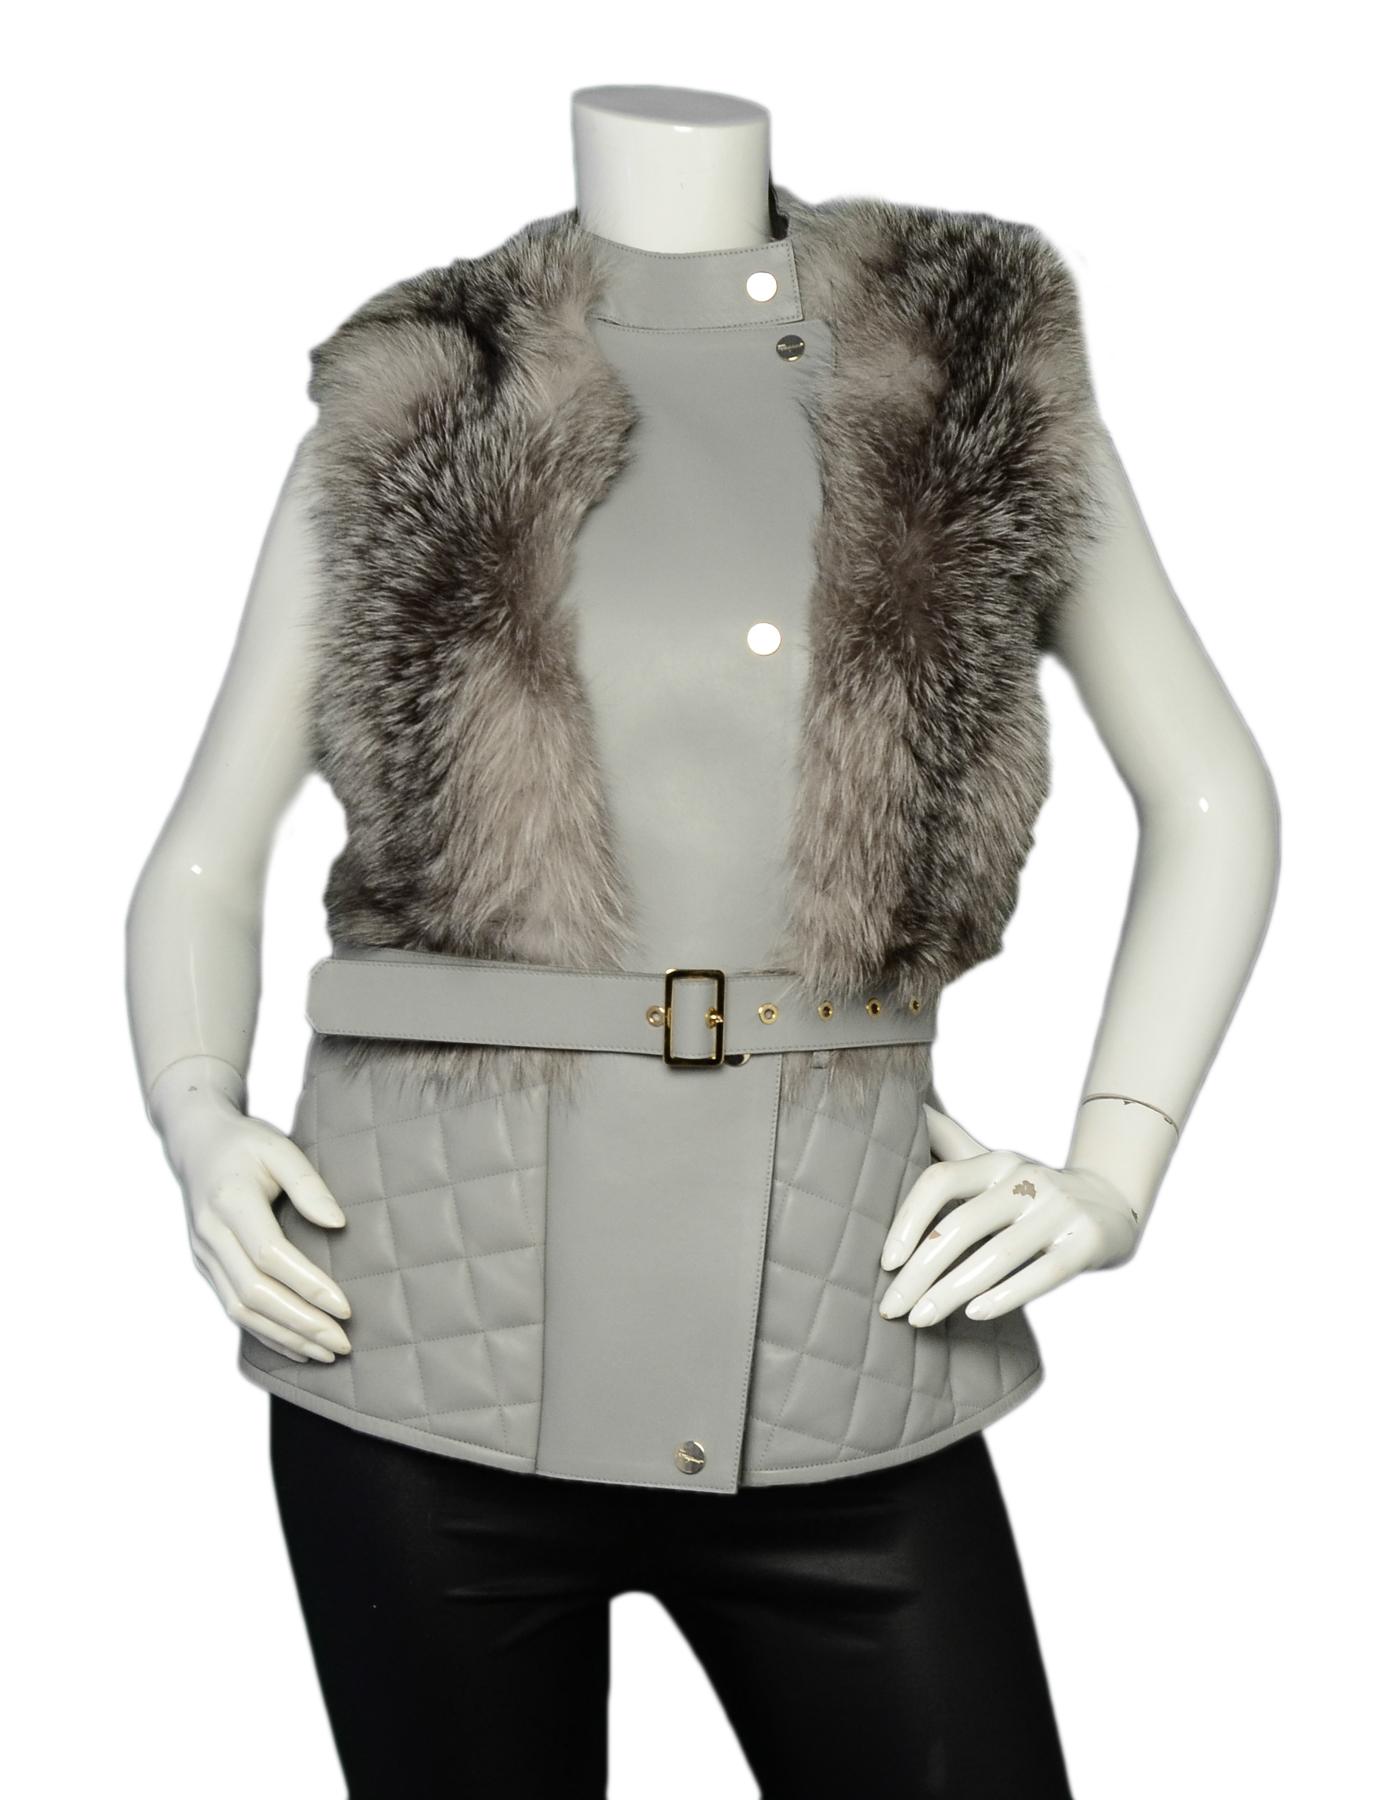 Salvatore Ferragamo Grey Leather Quilted Vest w/ Belt & Fur Detail sz 42

Made In: Italy
Color: Grey 
Materials: Leather, fur (missing composition tag)
Lining: Missing composition tag
Opening/Closure: Front zip closure with snaps
Overall Condition: